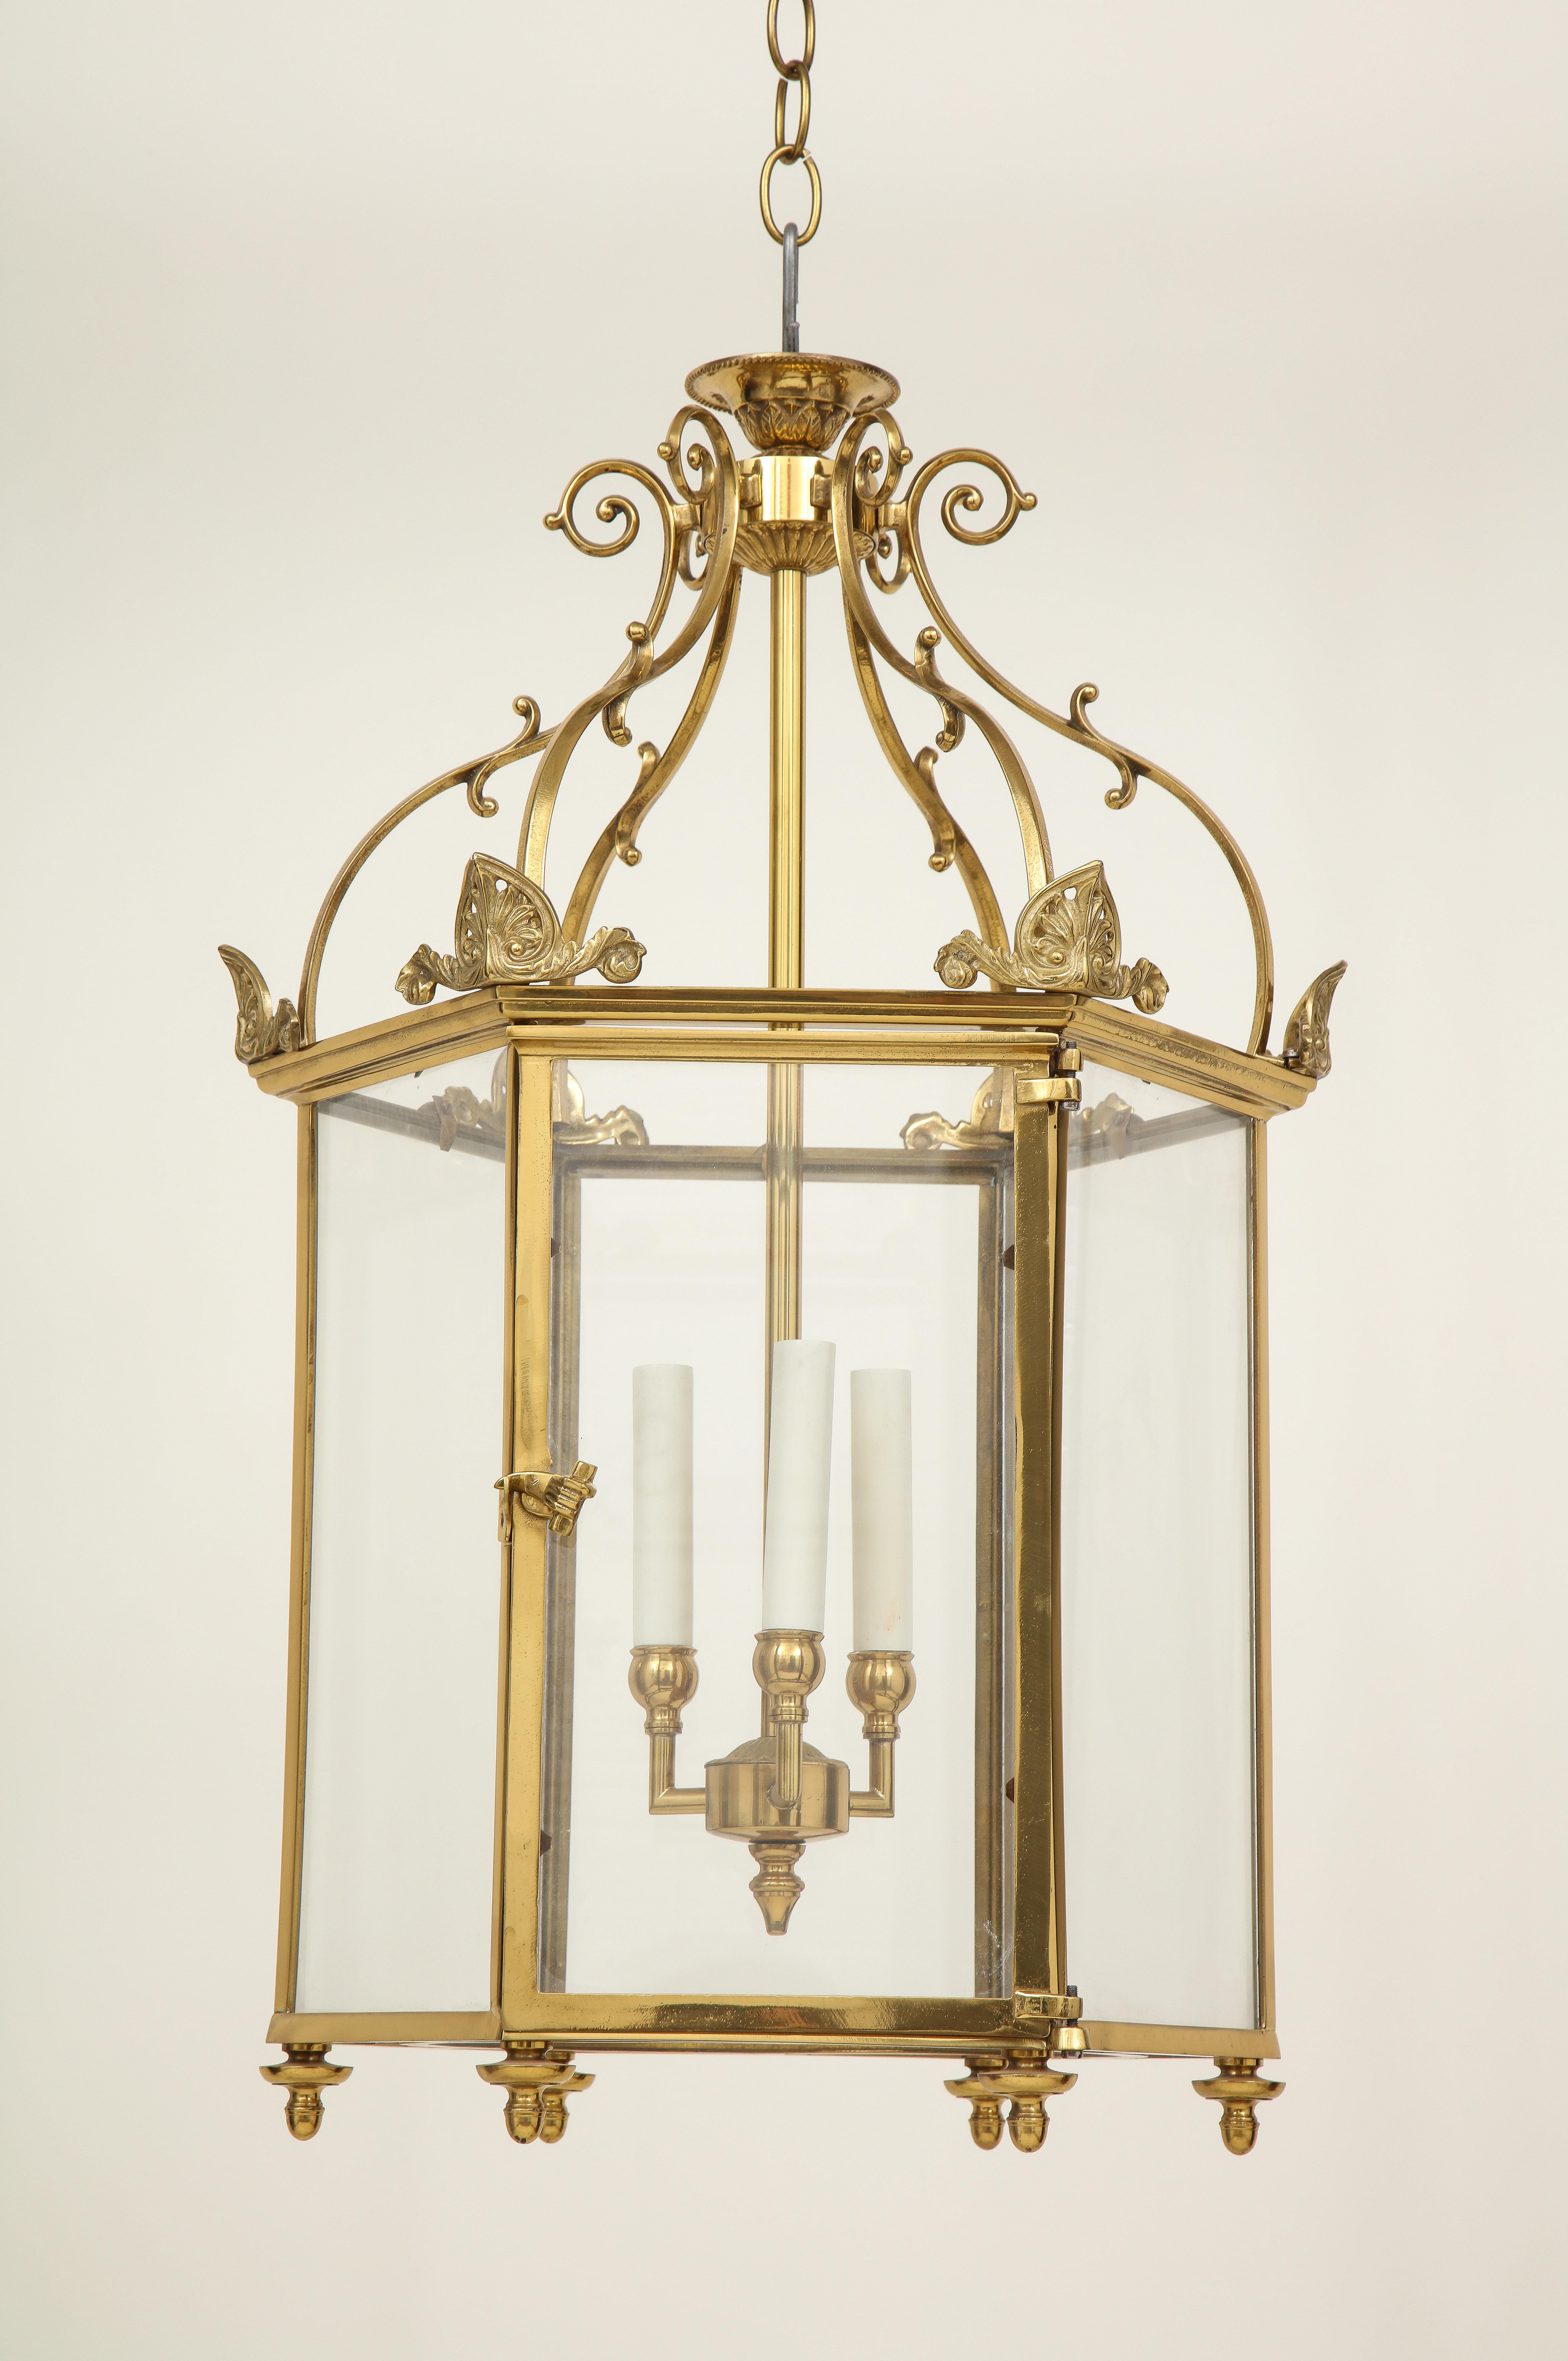 Of hexagonal form; surmounted by anthemion finials and S-scroll brackets. With four electrified candle sleeves.